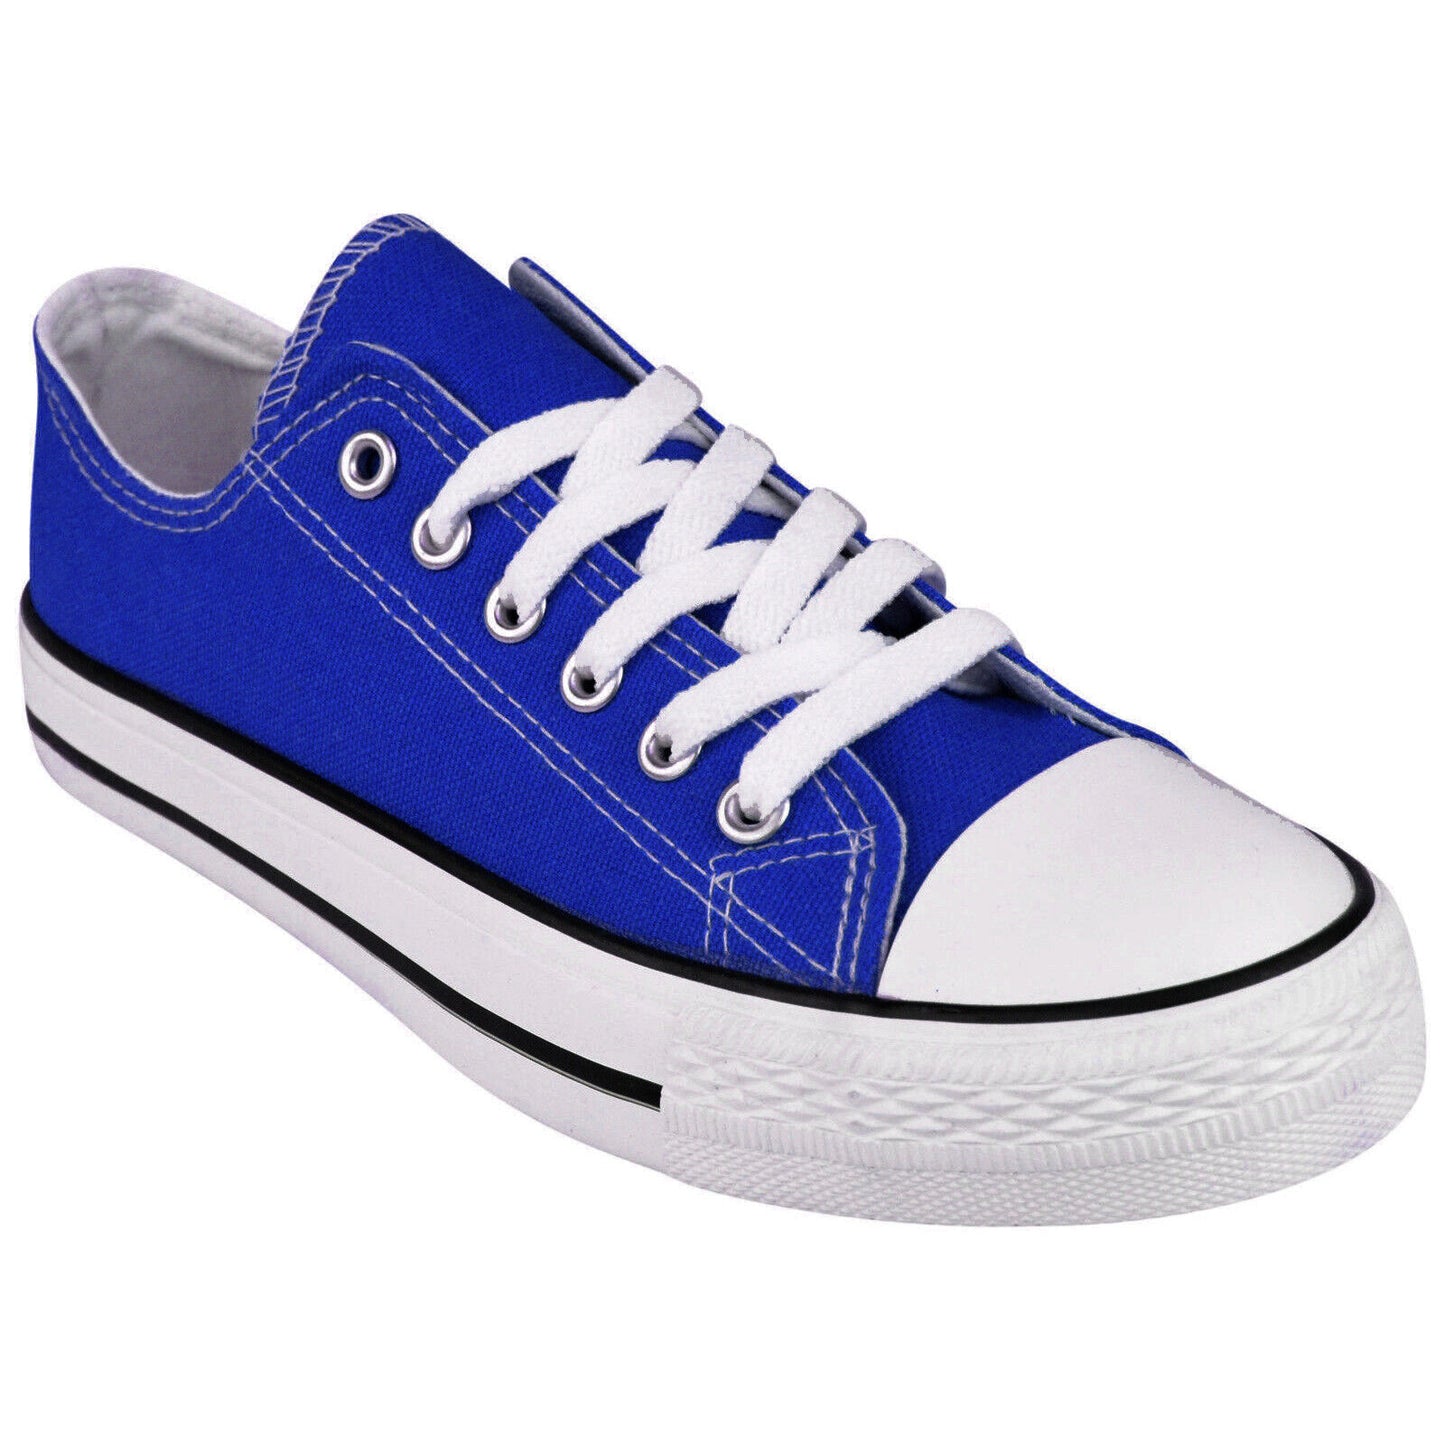 WOMENS CANVAS SHOES LADIES LACE UP PLIMSOLLS PUMPS SNEAKERS TRAINERS SKATERS